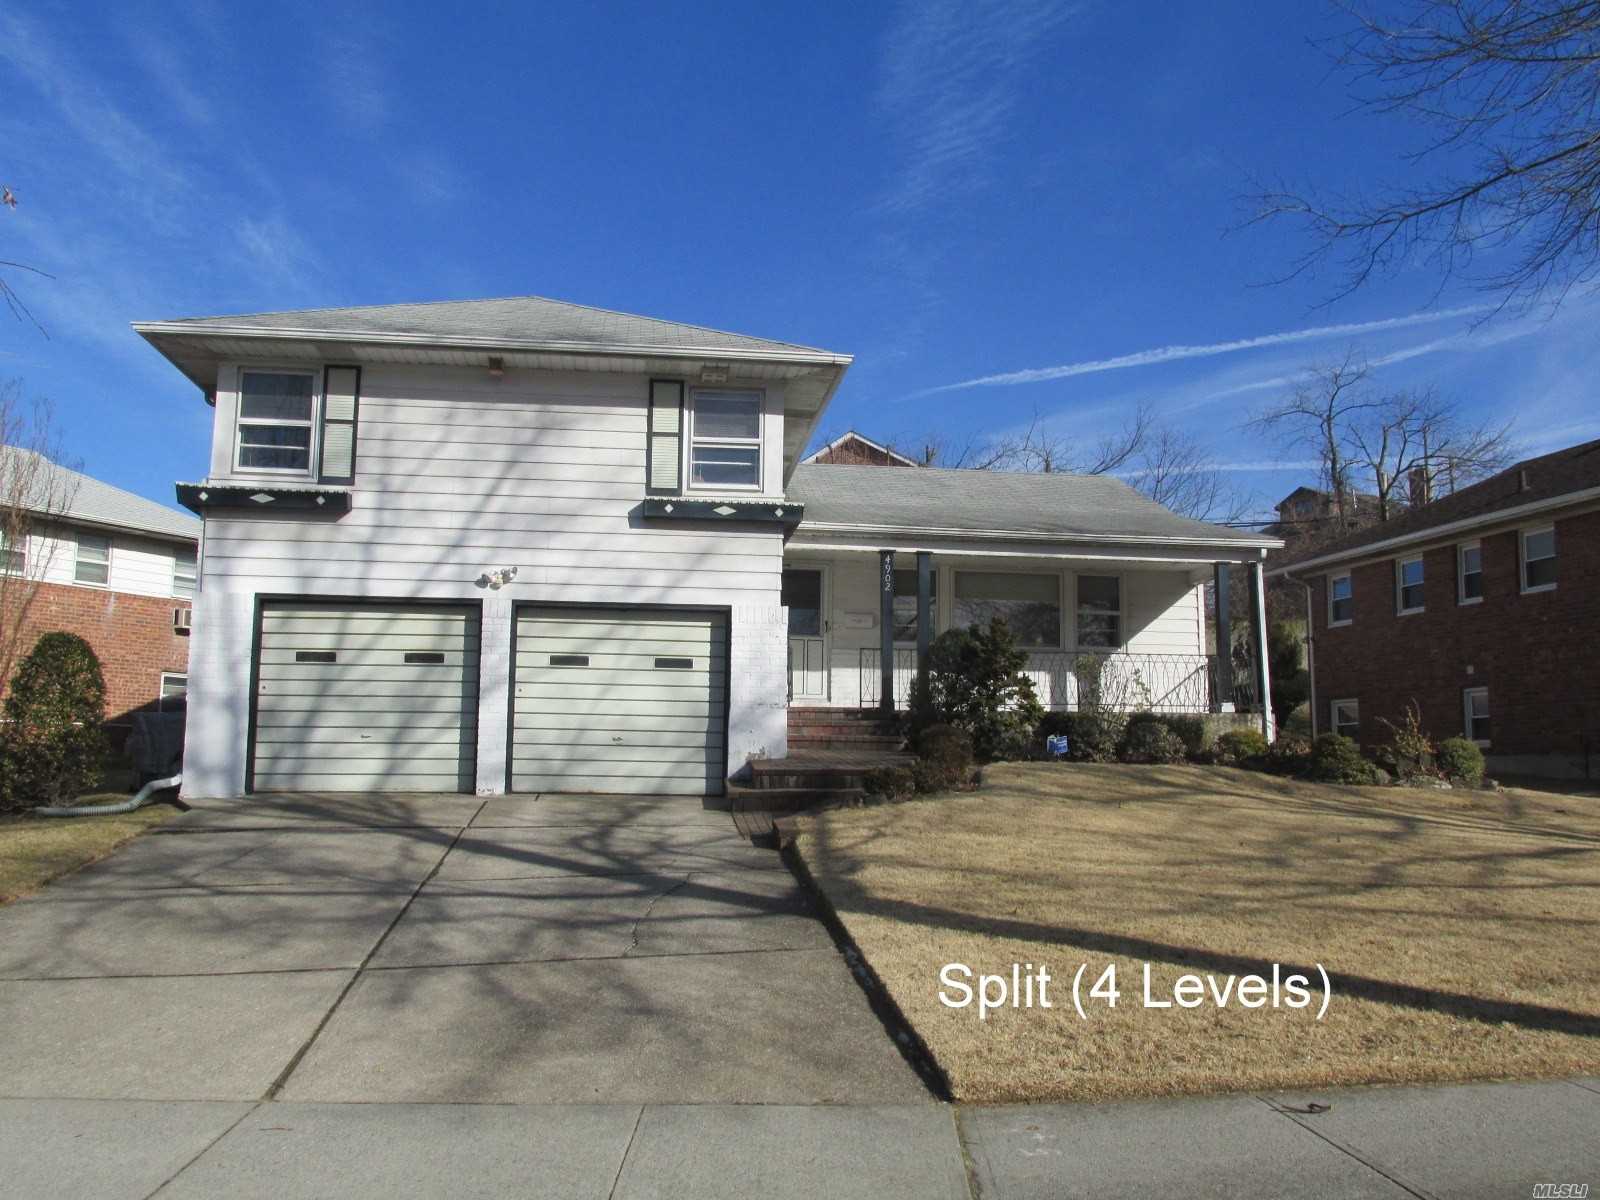 Huge Four Level Split On Over Sized Lot; One Block From Oakland Lake; Hardwood Floors Throughout; Attached Two Car Garage Plus Family Room; Brick Fireplace Plus Finished Basement; Three Bedrooms/Two Full Baths.